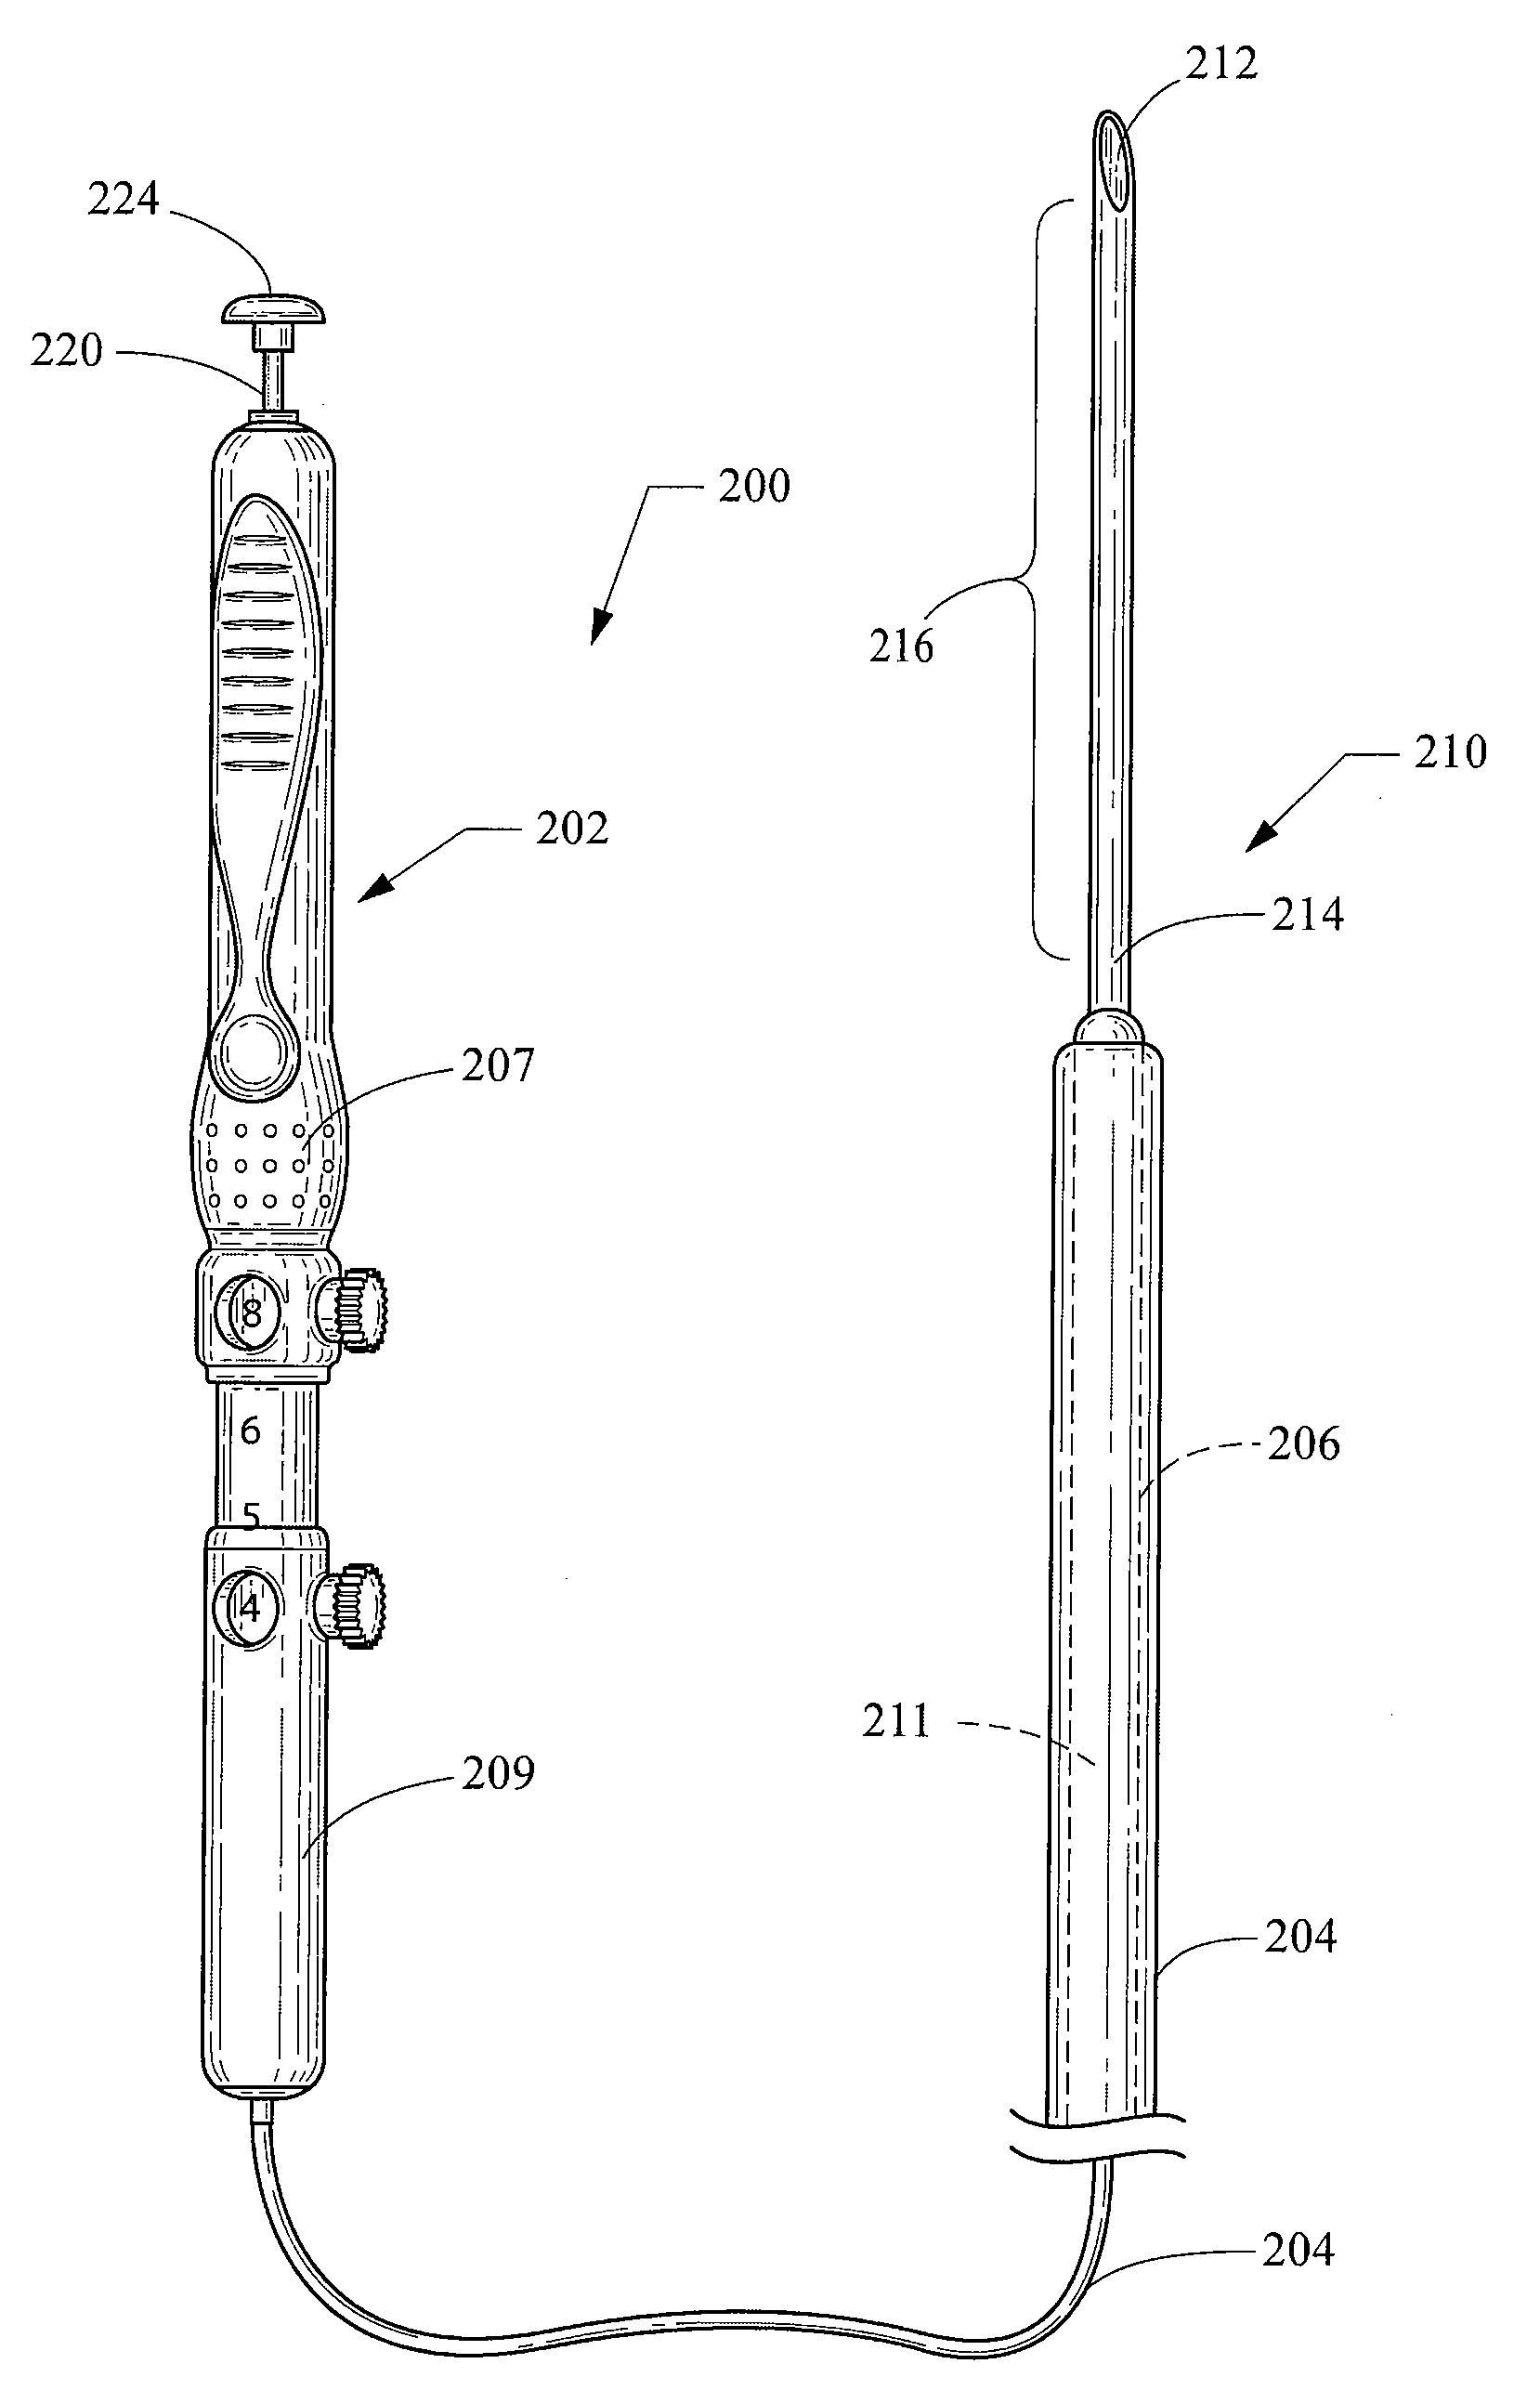 Endoscopic ultrasound-guided stent placement device and method